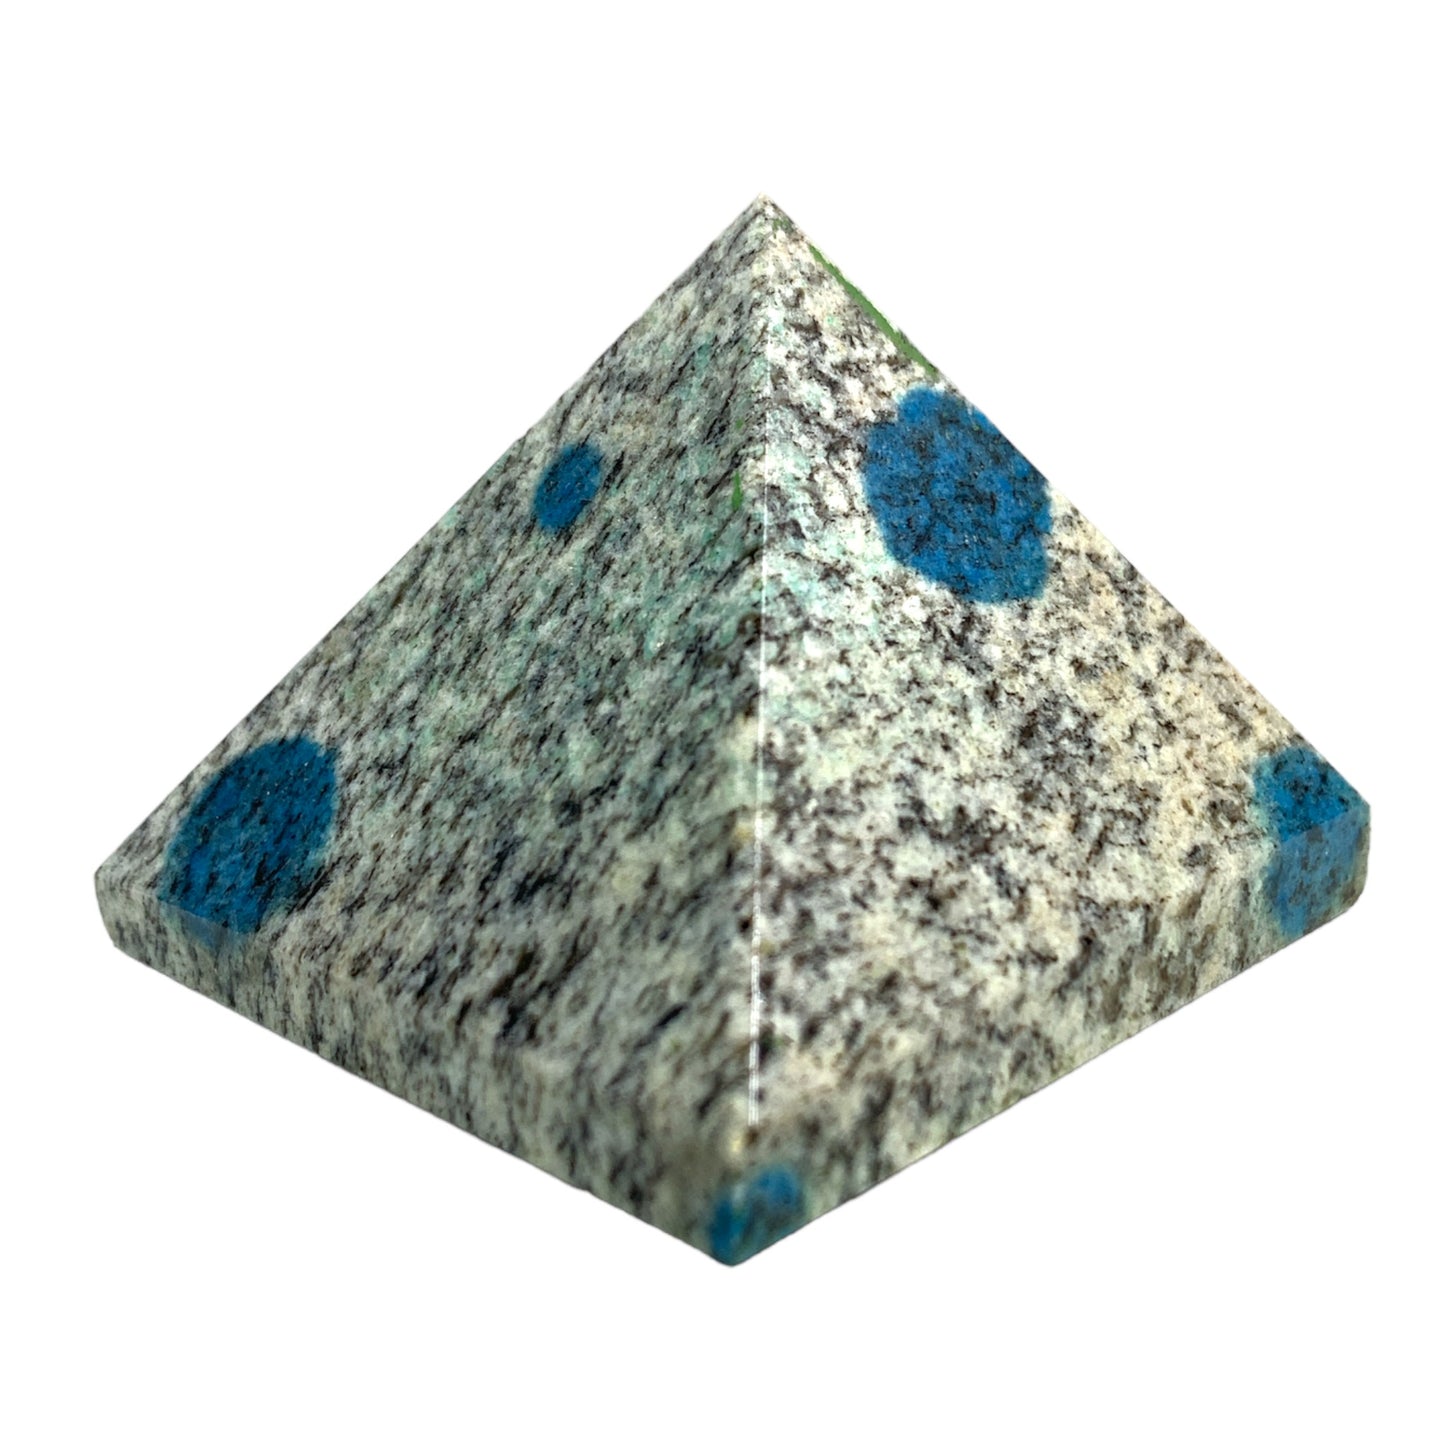 K2 Raindrop Jasper - 40-70mm - Pyramids - Azurite - Price per gram per piece (B2B ordering 1 = 1 piece so we charge Ex. 60g = $12.60 each)  sense of safety security and grounding